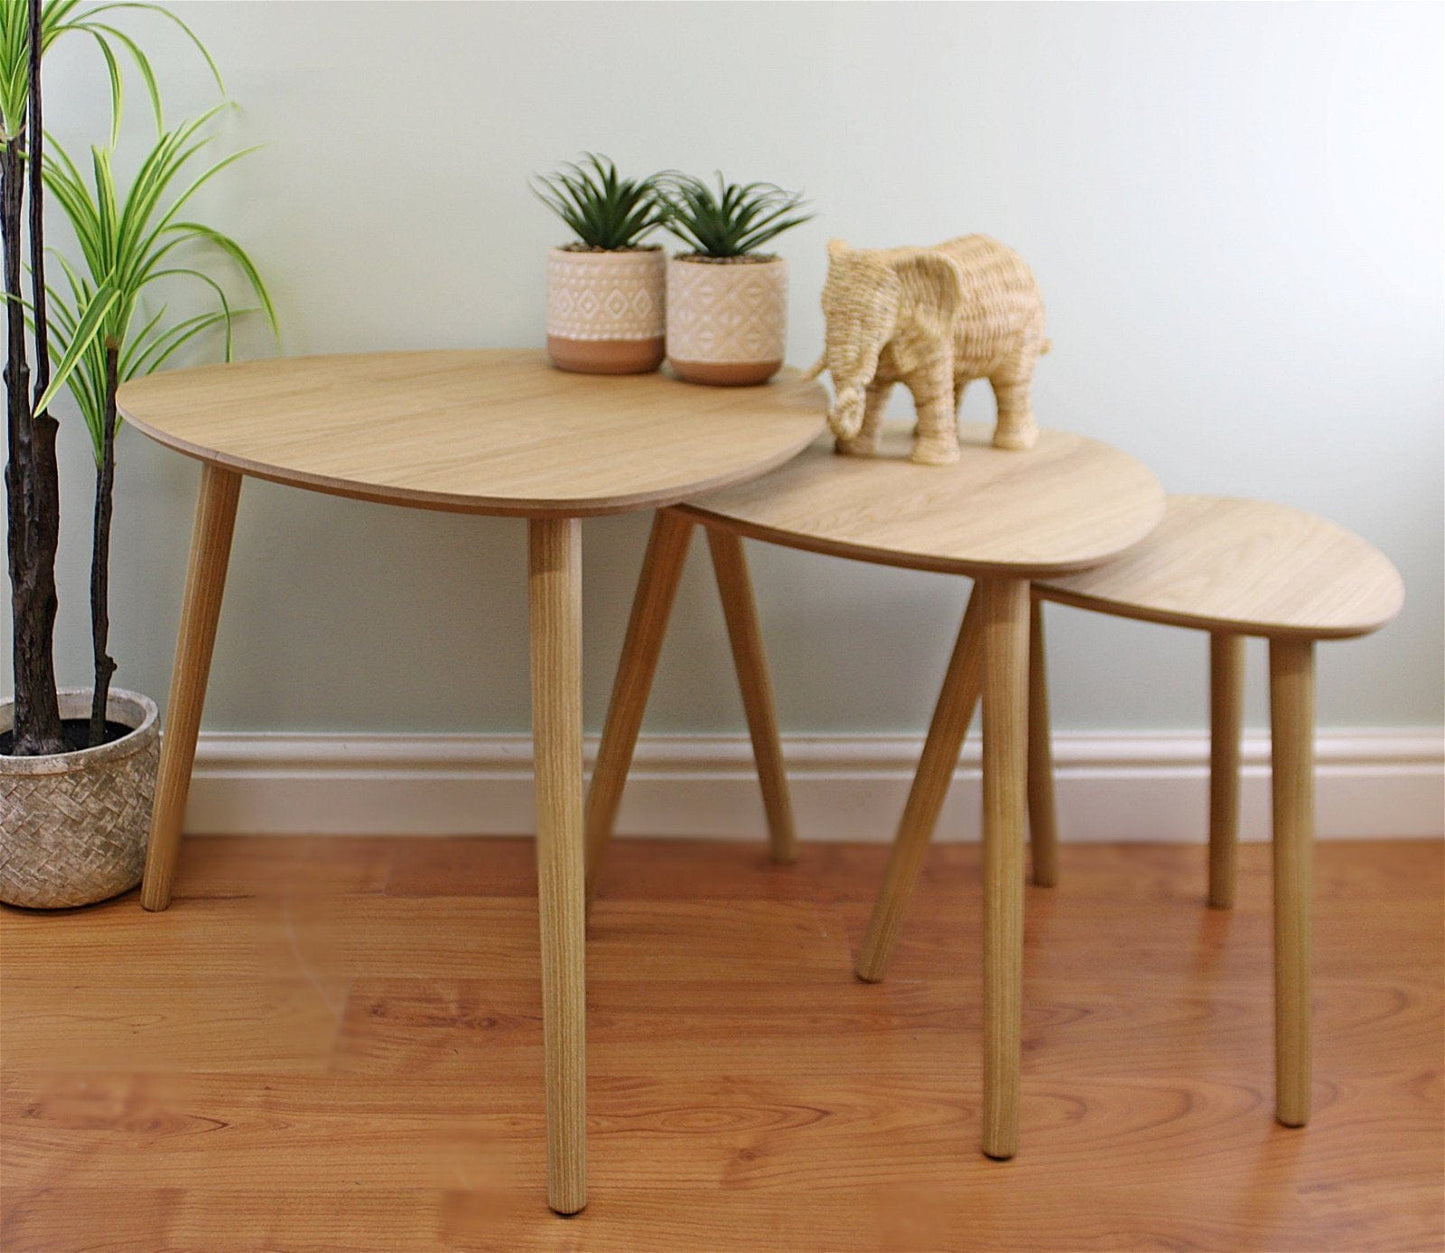 Set of 3 Oval Nest Of Tables, Wooden Finish - Kaftan direct